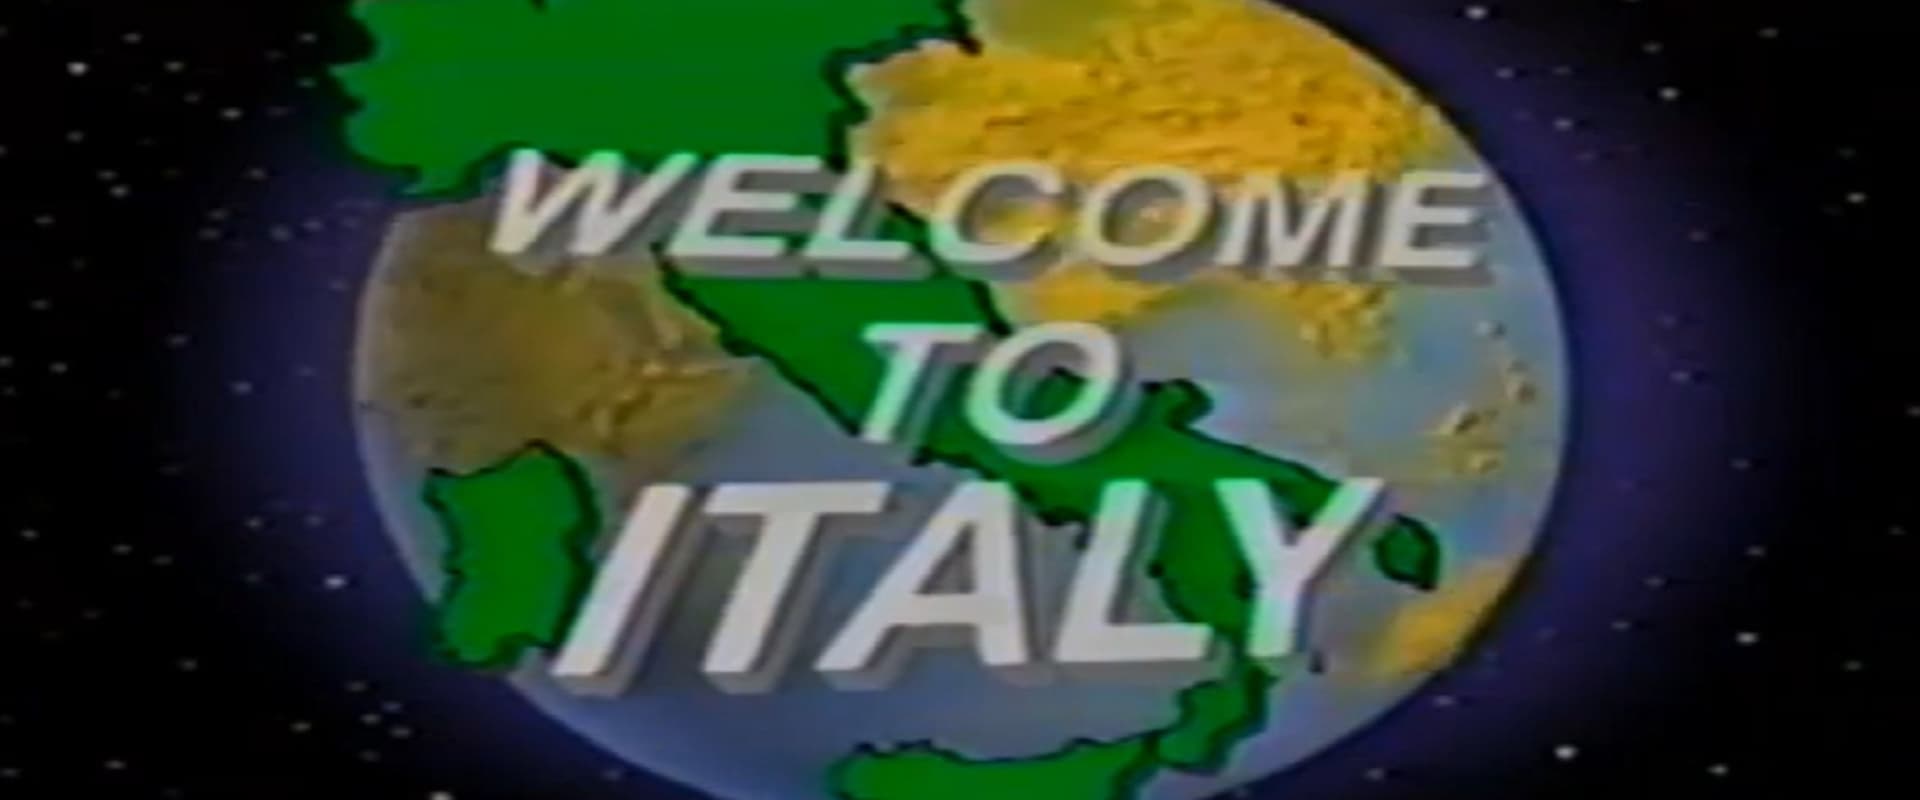 Welcome to Italy